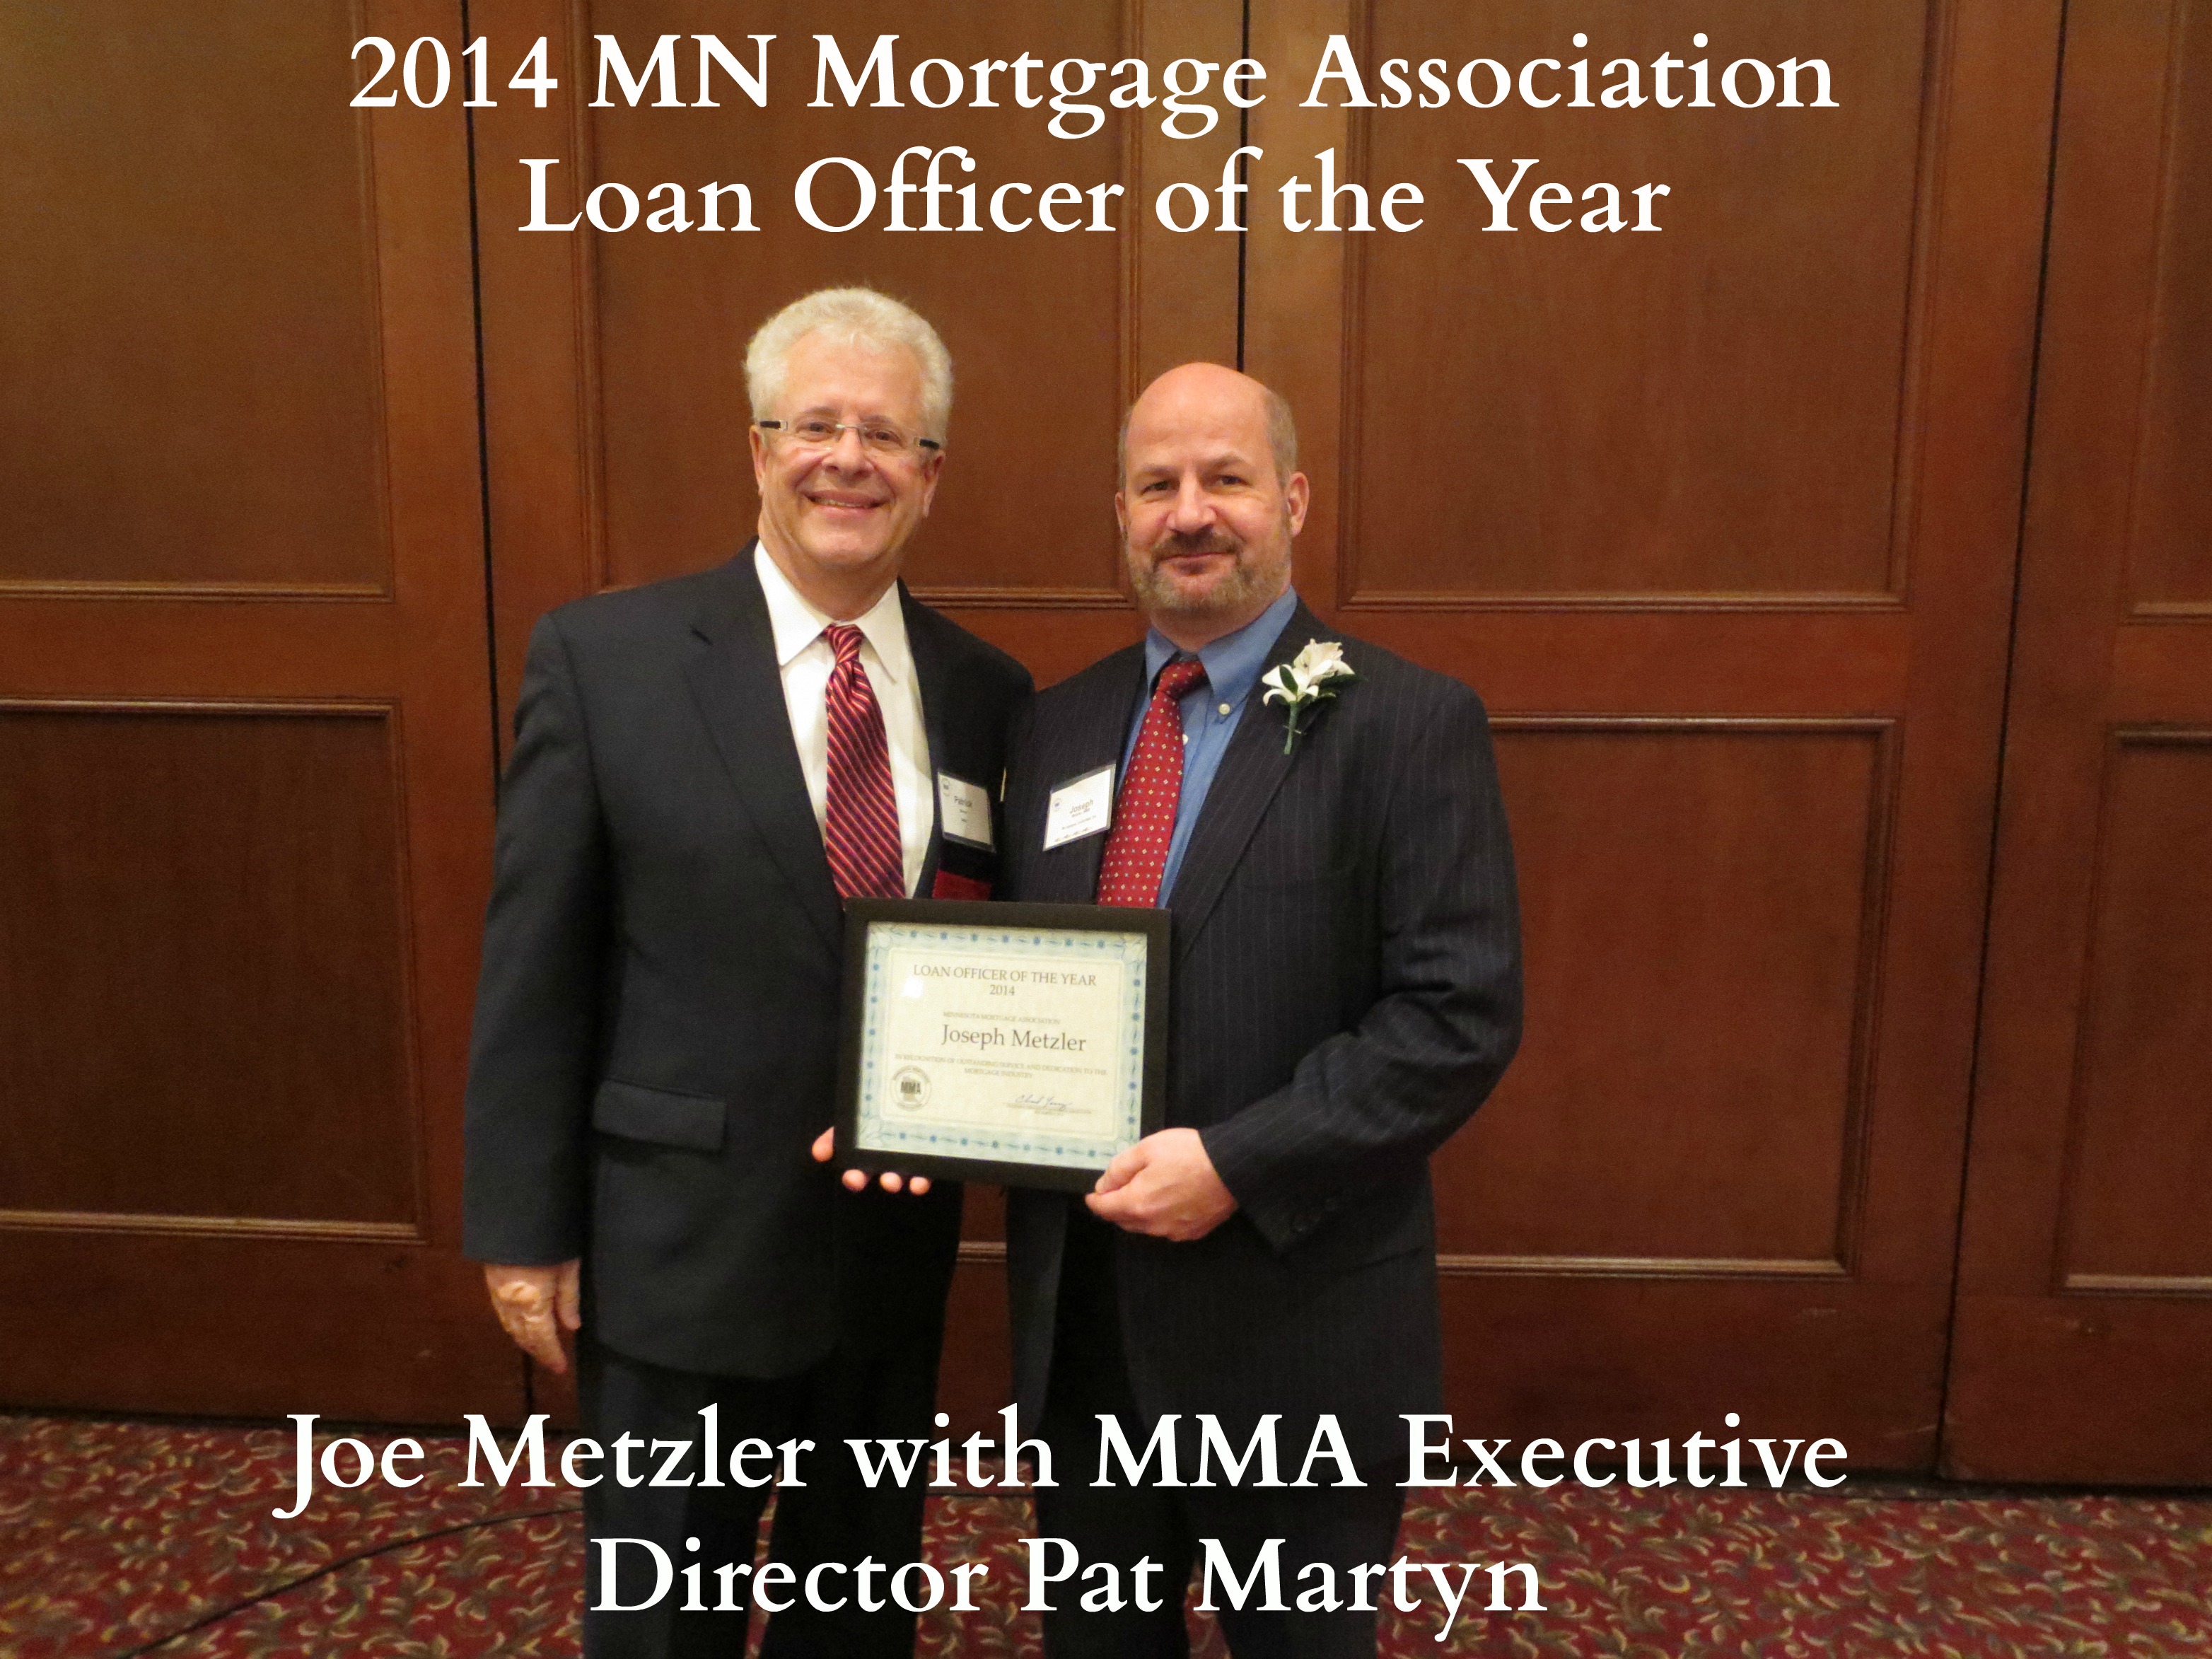 MN 2014 Mortgage Loan Officer of the Year